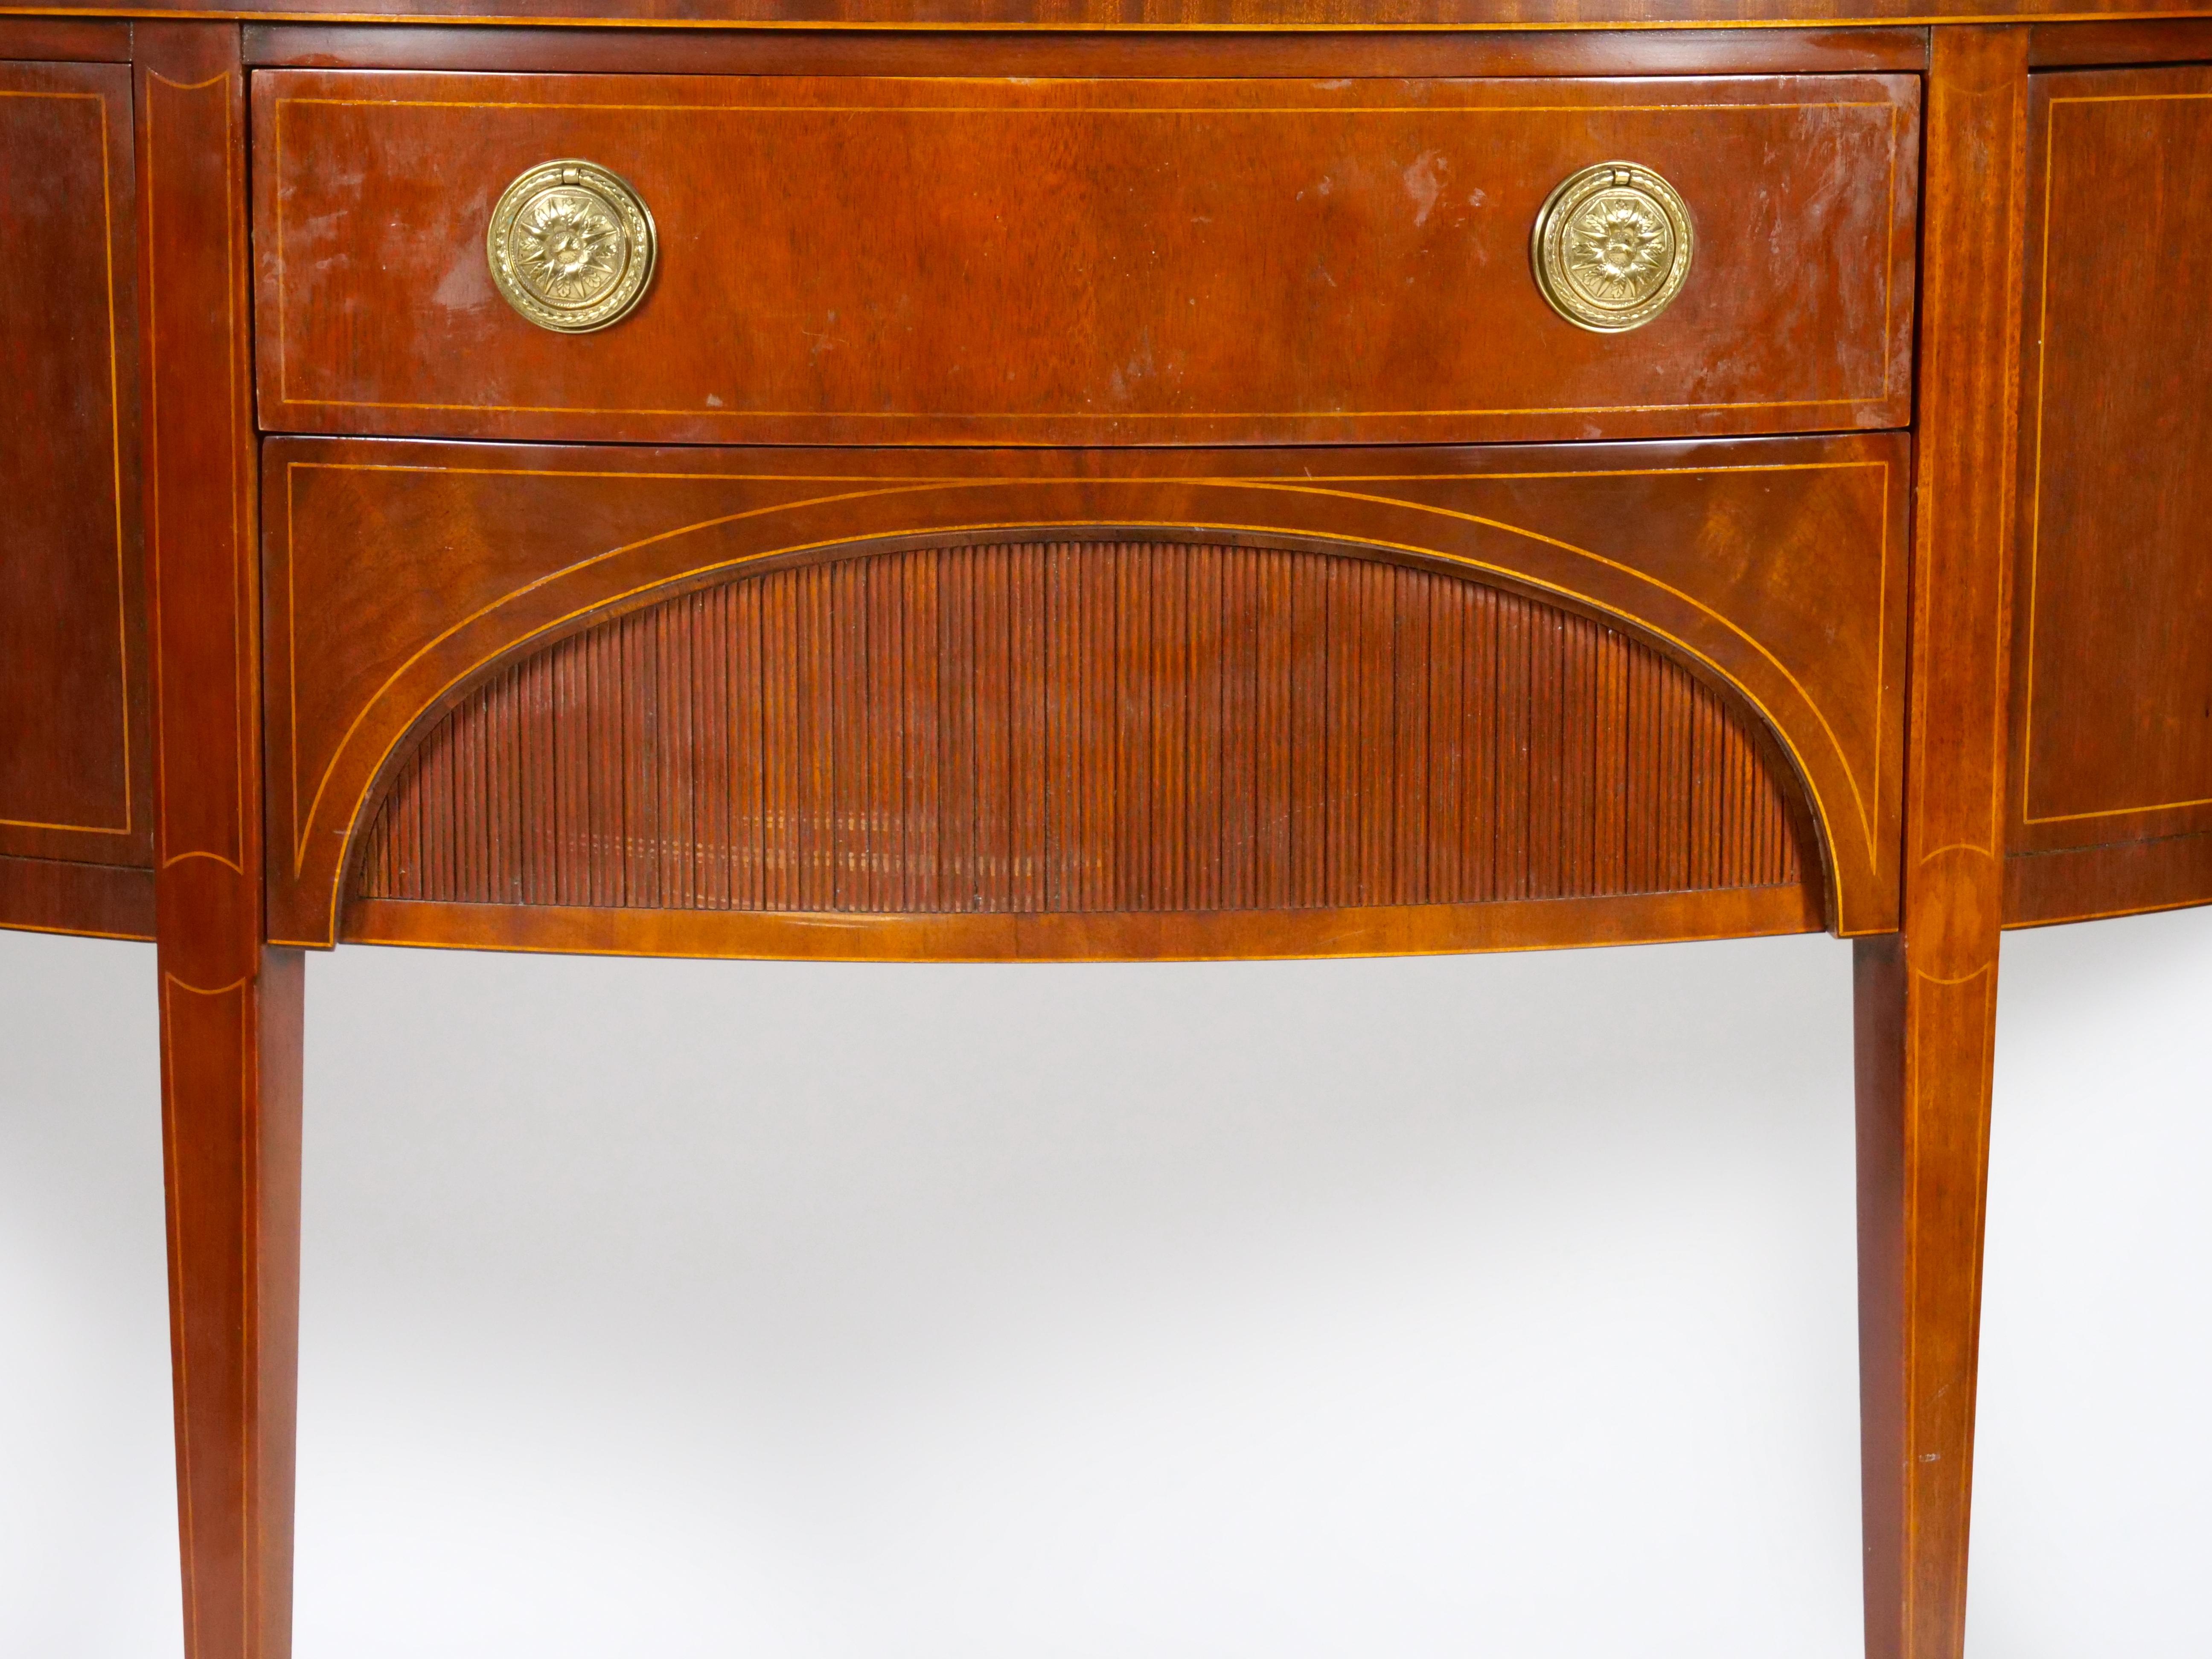 American Federal Style Mahogany Inlaid Decorated Credenzas / Sideboard For Sale 3